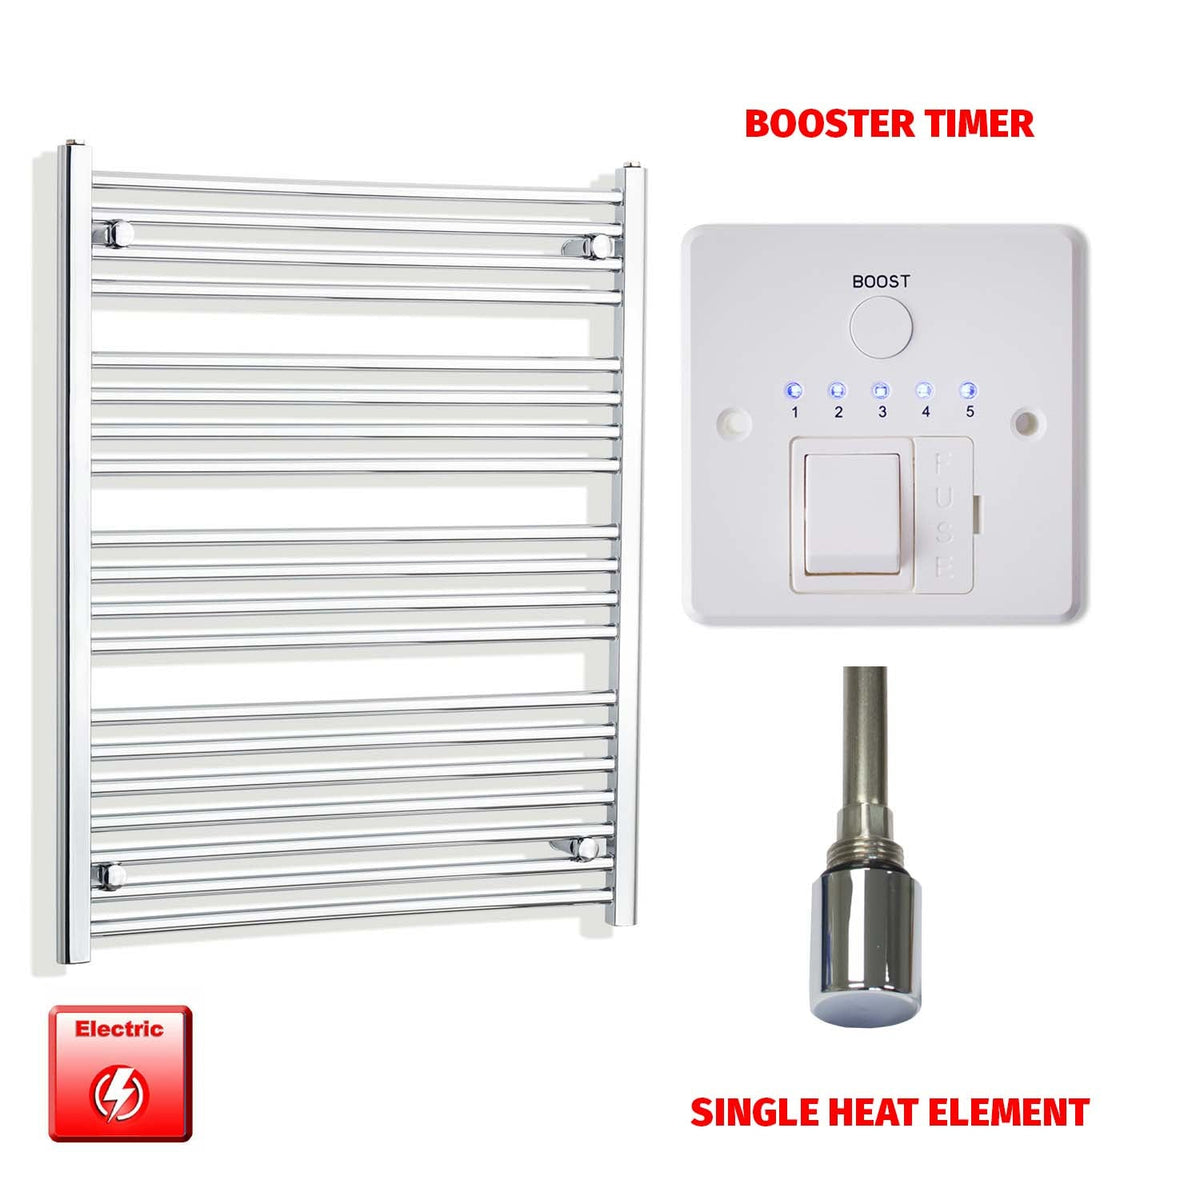 1000 x 750 Pre-Filled Electric Heated Towel Radiator Curved or Straight Chrome Single heat element Booster timer